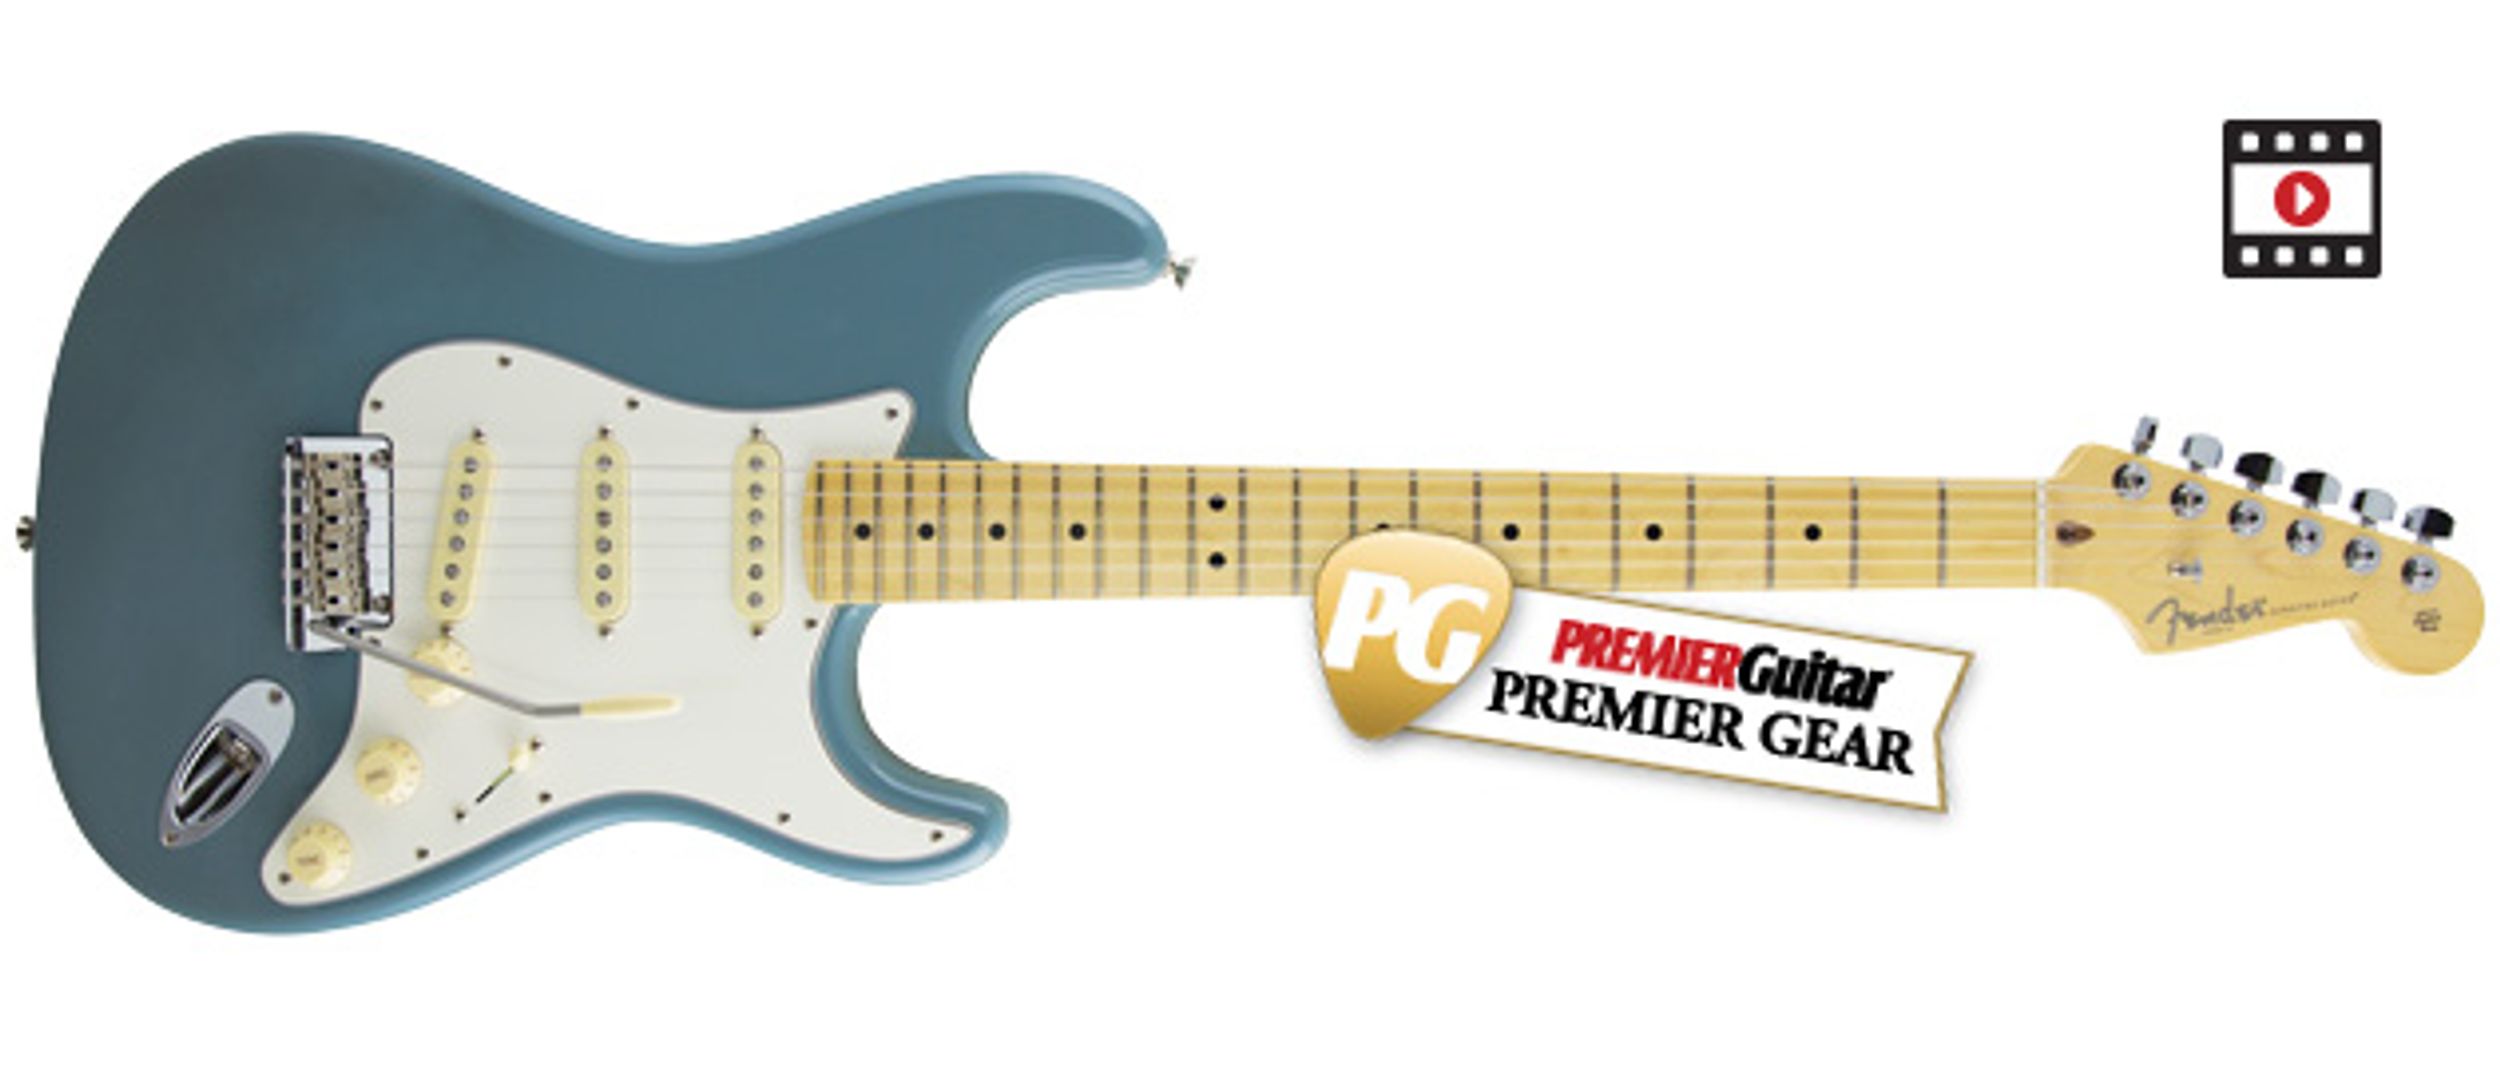 Fender American Professional Stratocaster Review